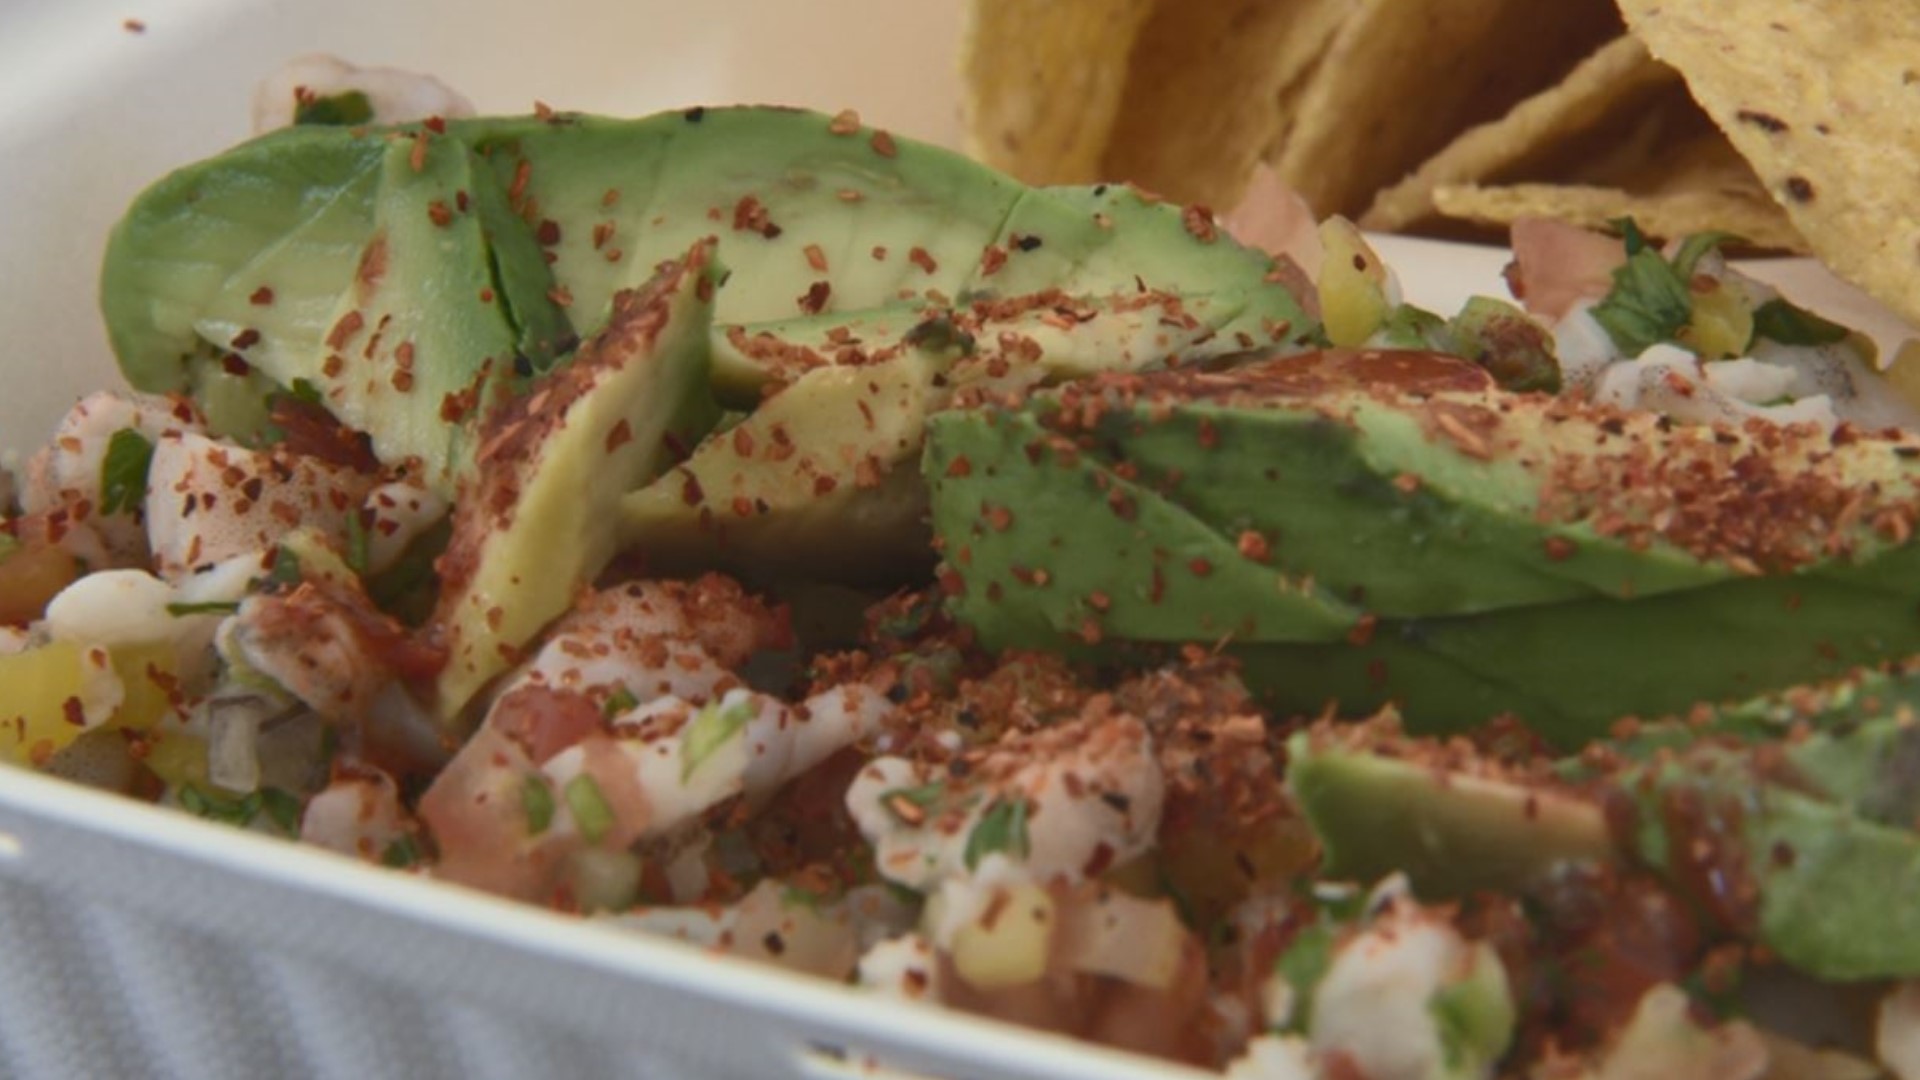 Shark Bite Ceviches is located in the Beacon Hill neighborhood. #k5evening